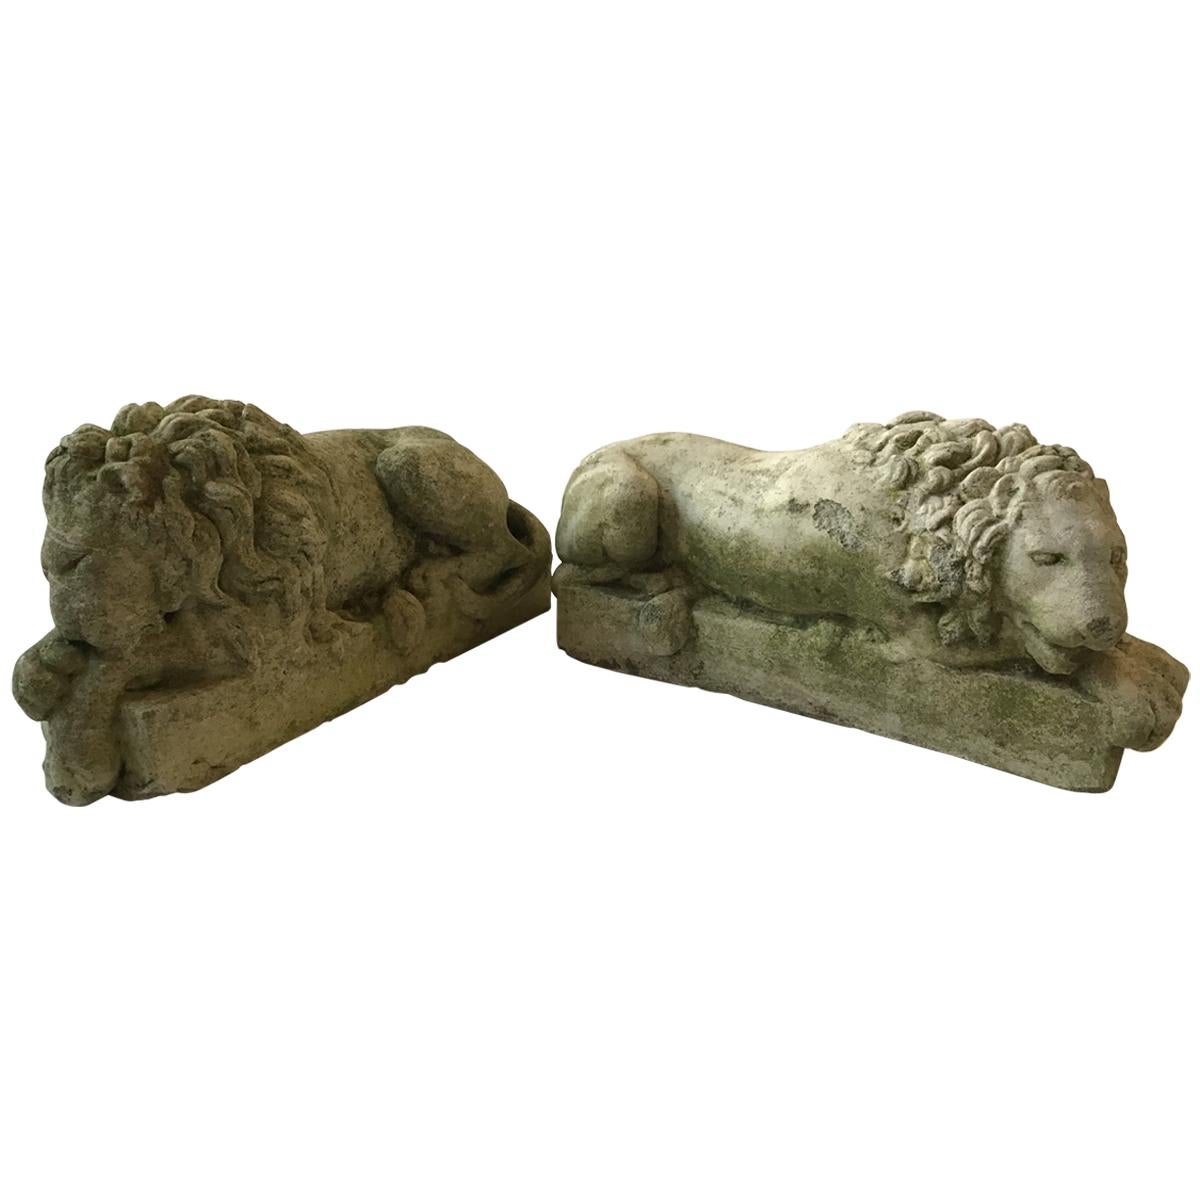 Pair of Small 1960s Concrete Lions